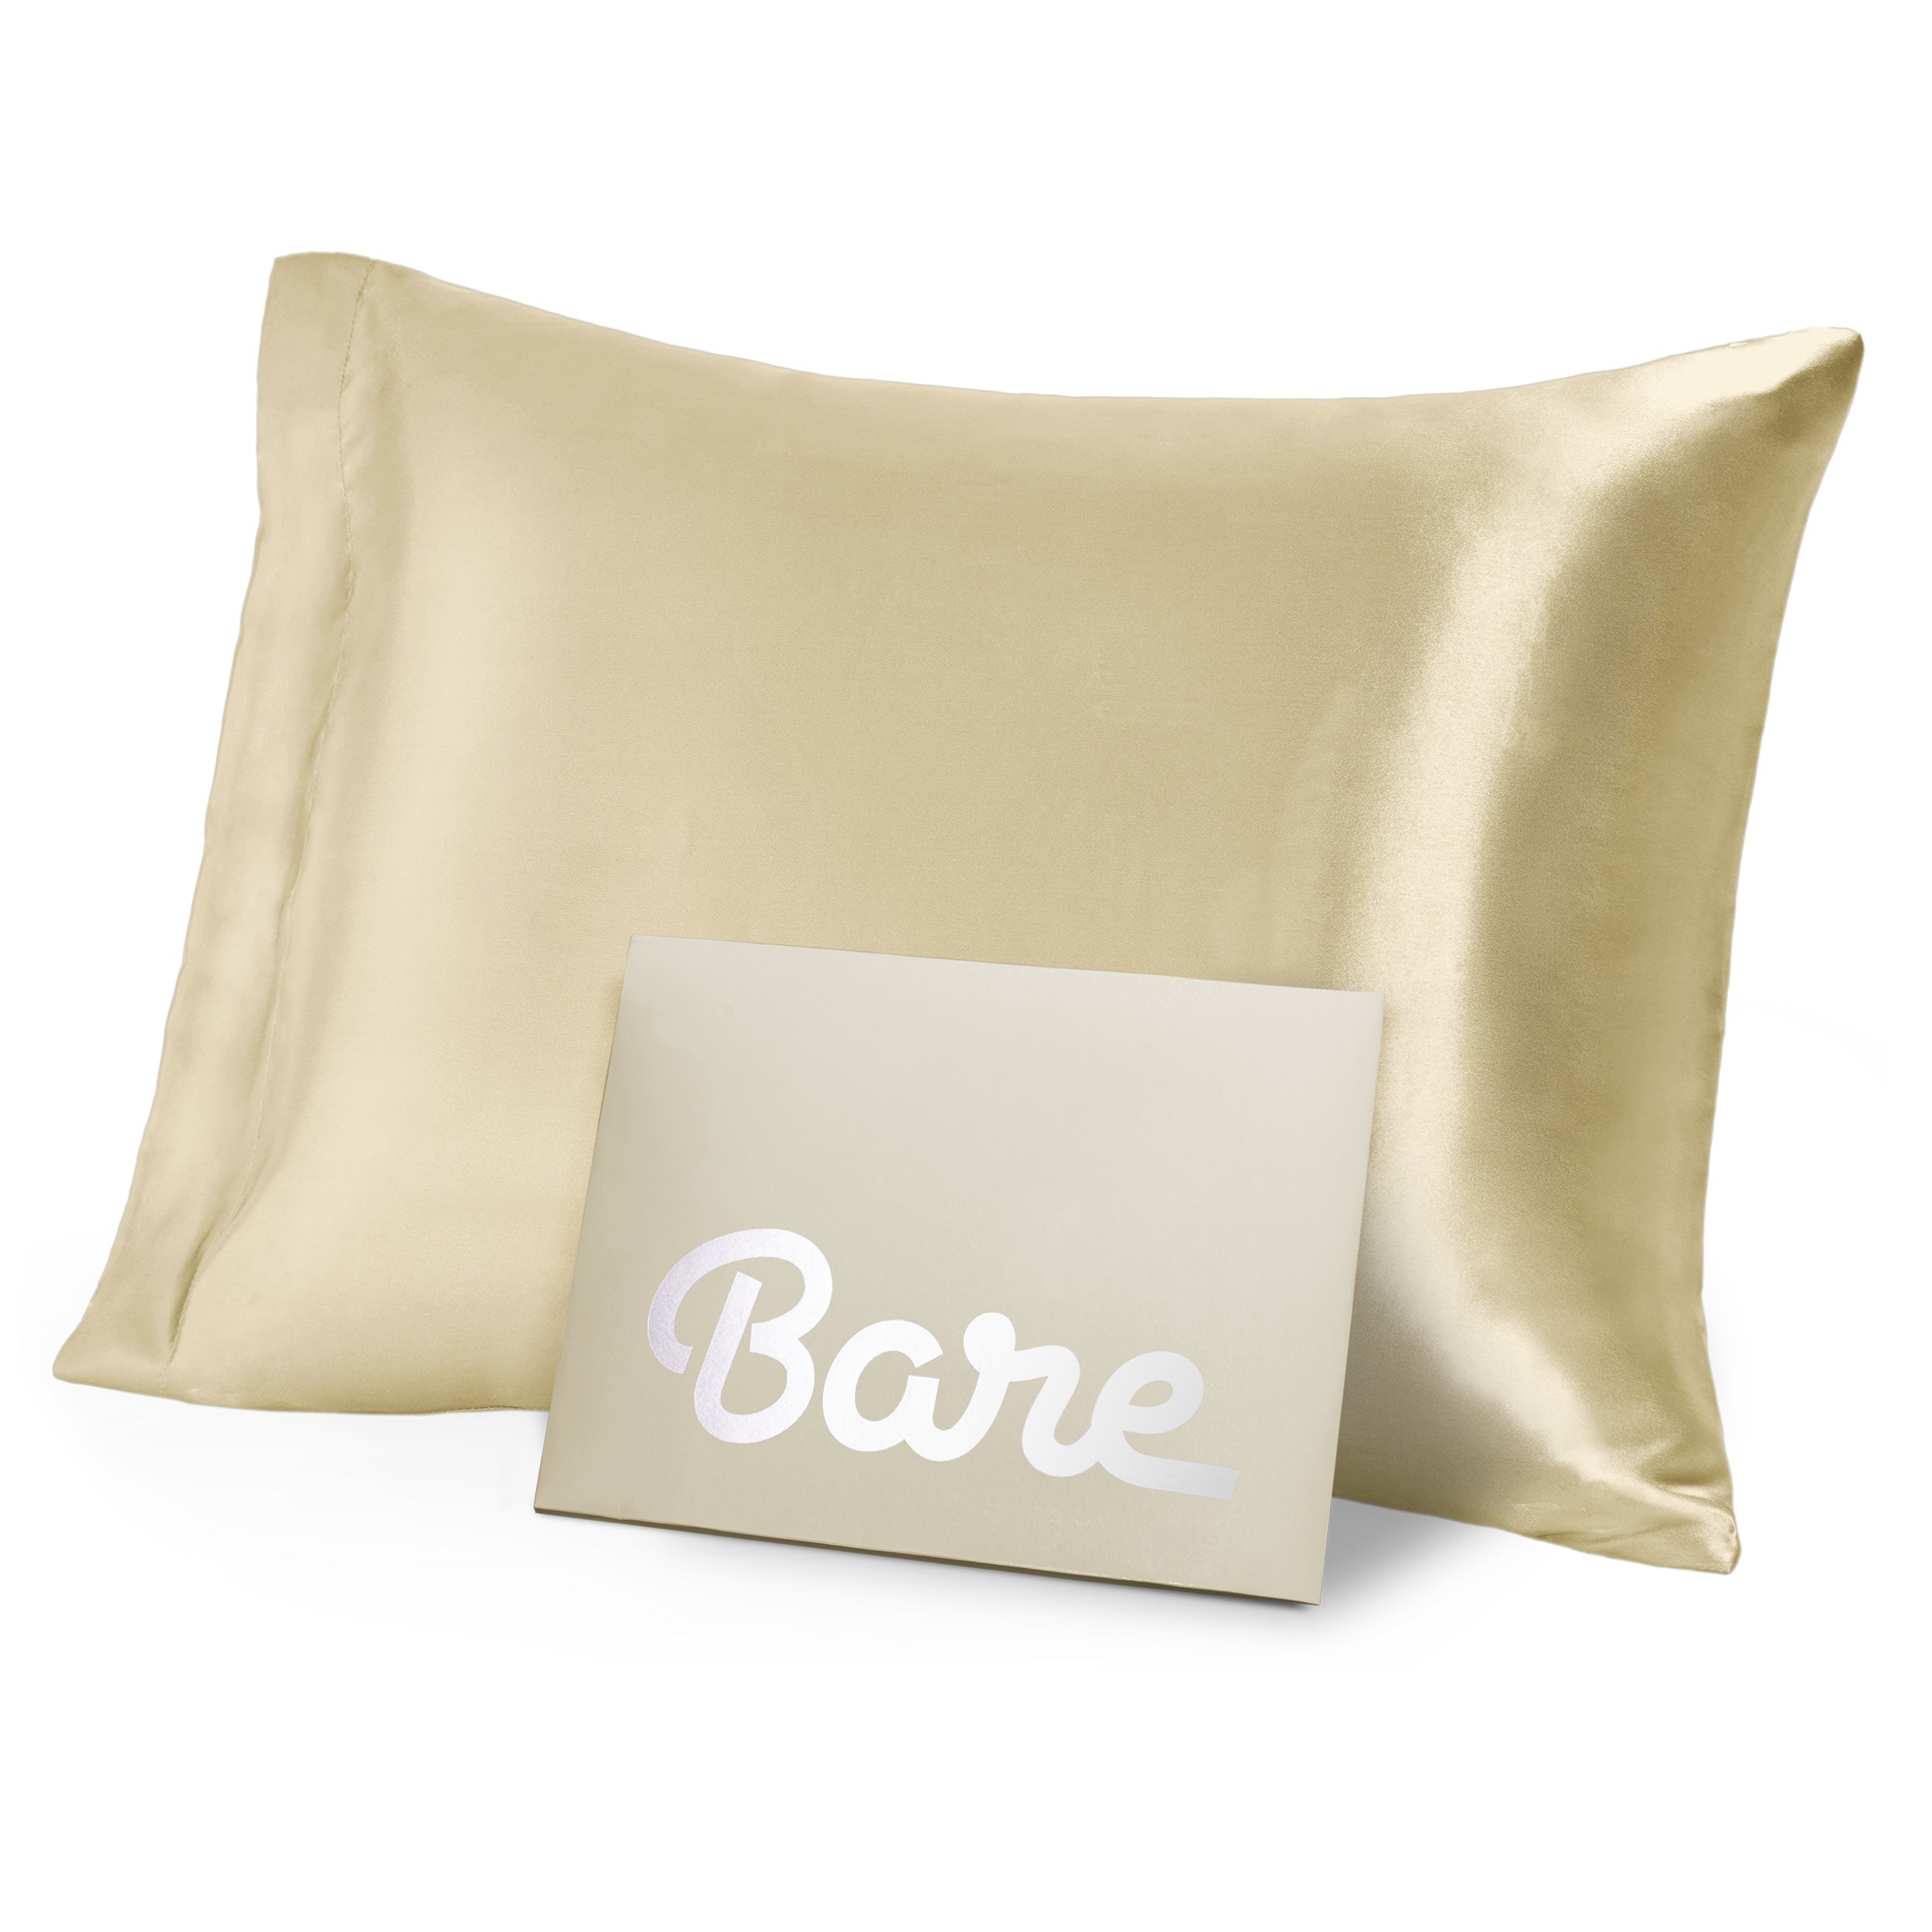 A champagne mulberry silk pillowcase on a pillow